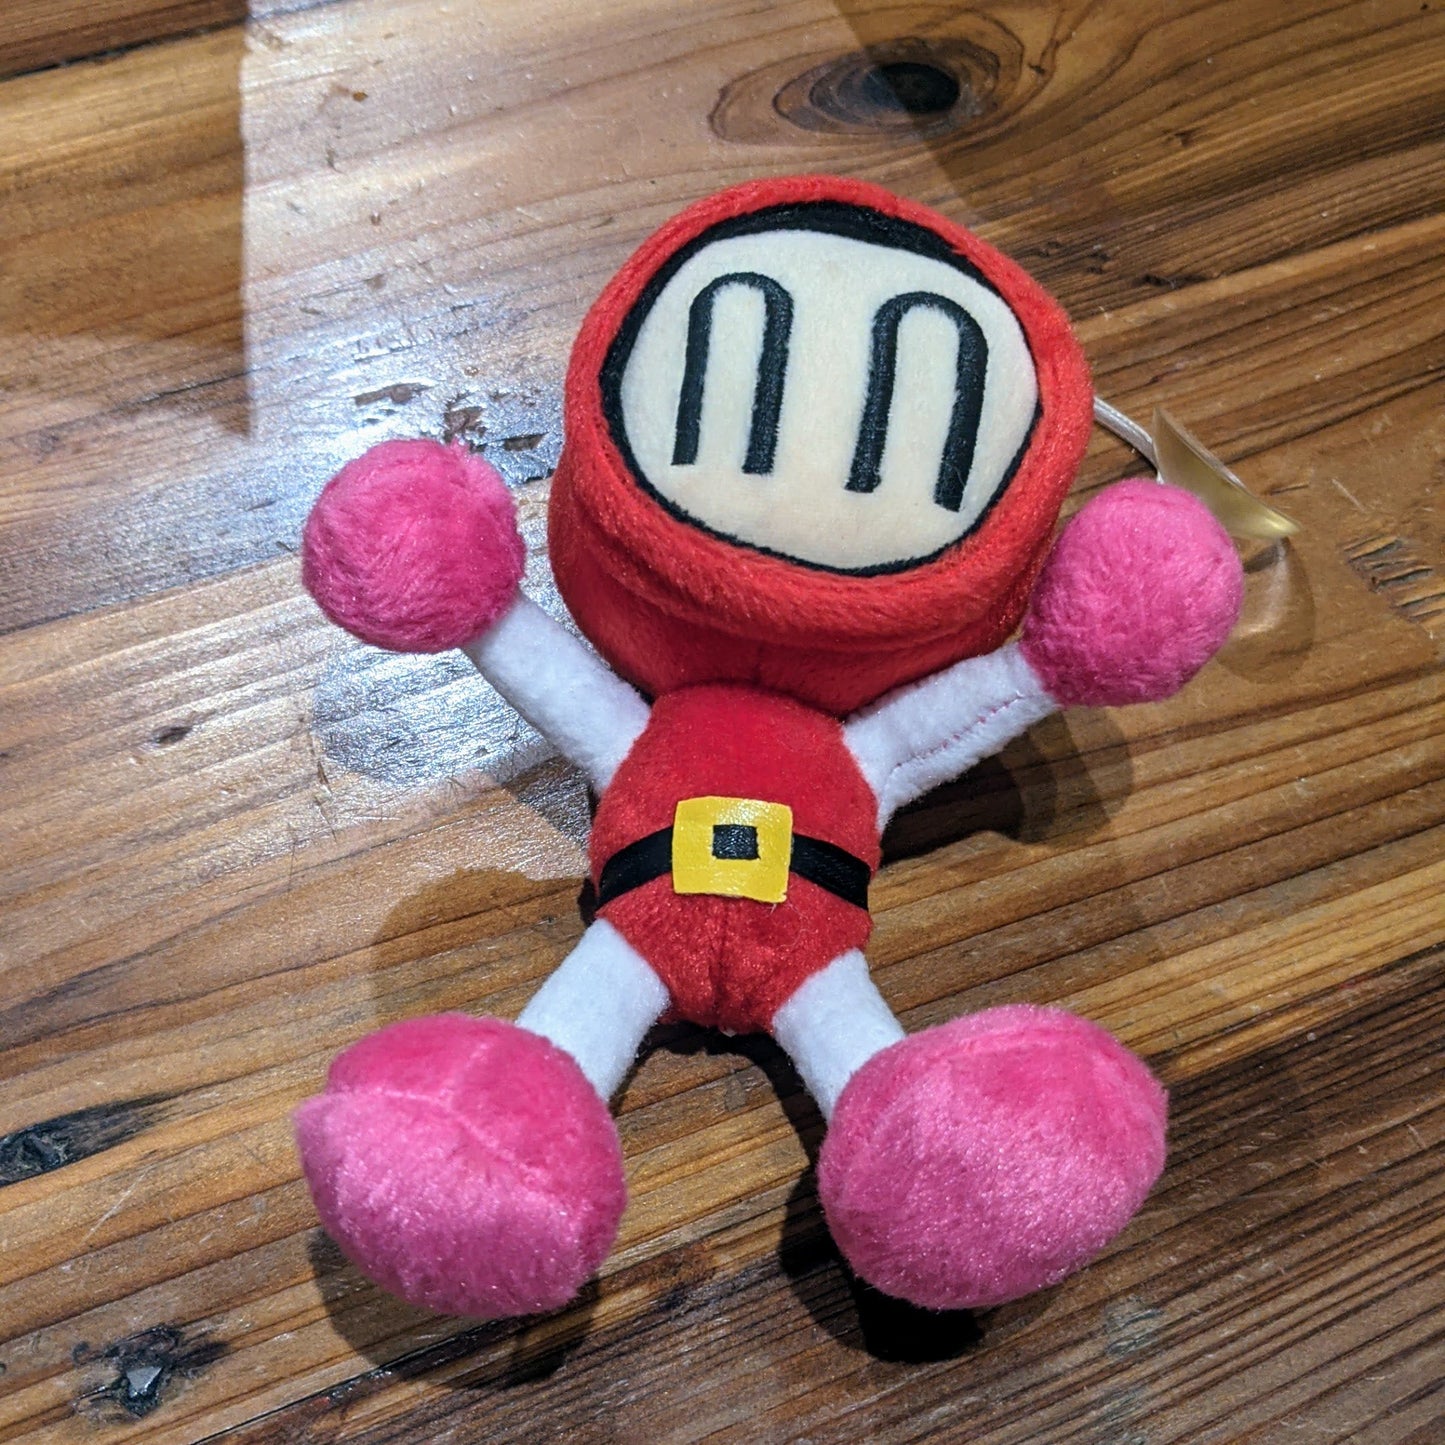 Taiwan Limited Bomberman Red ver 6" Plush Doll Figure